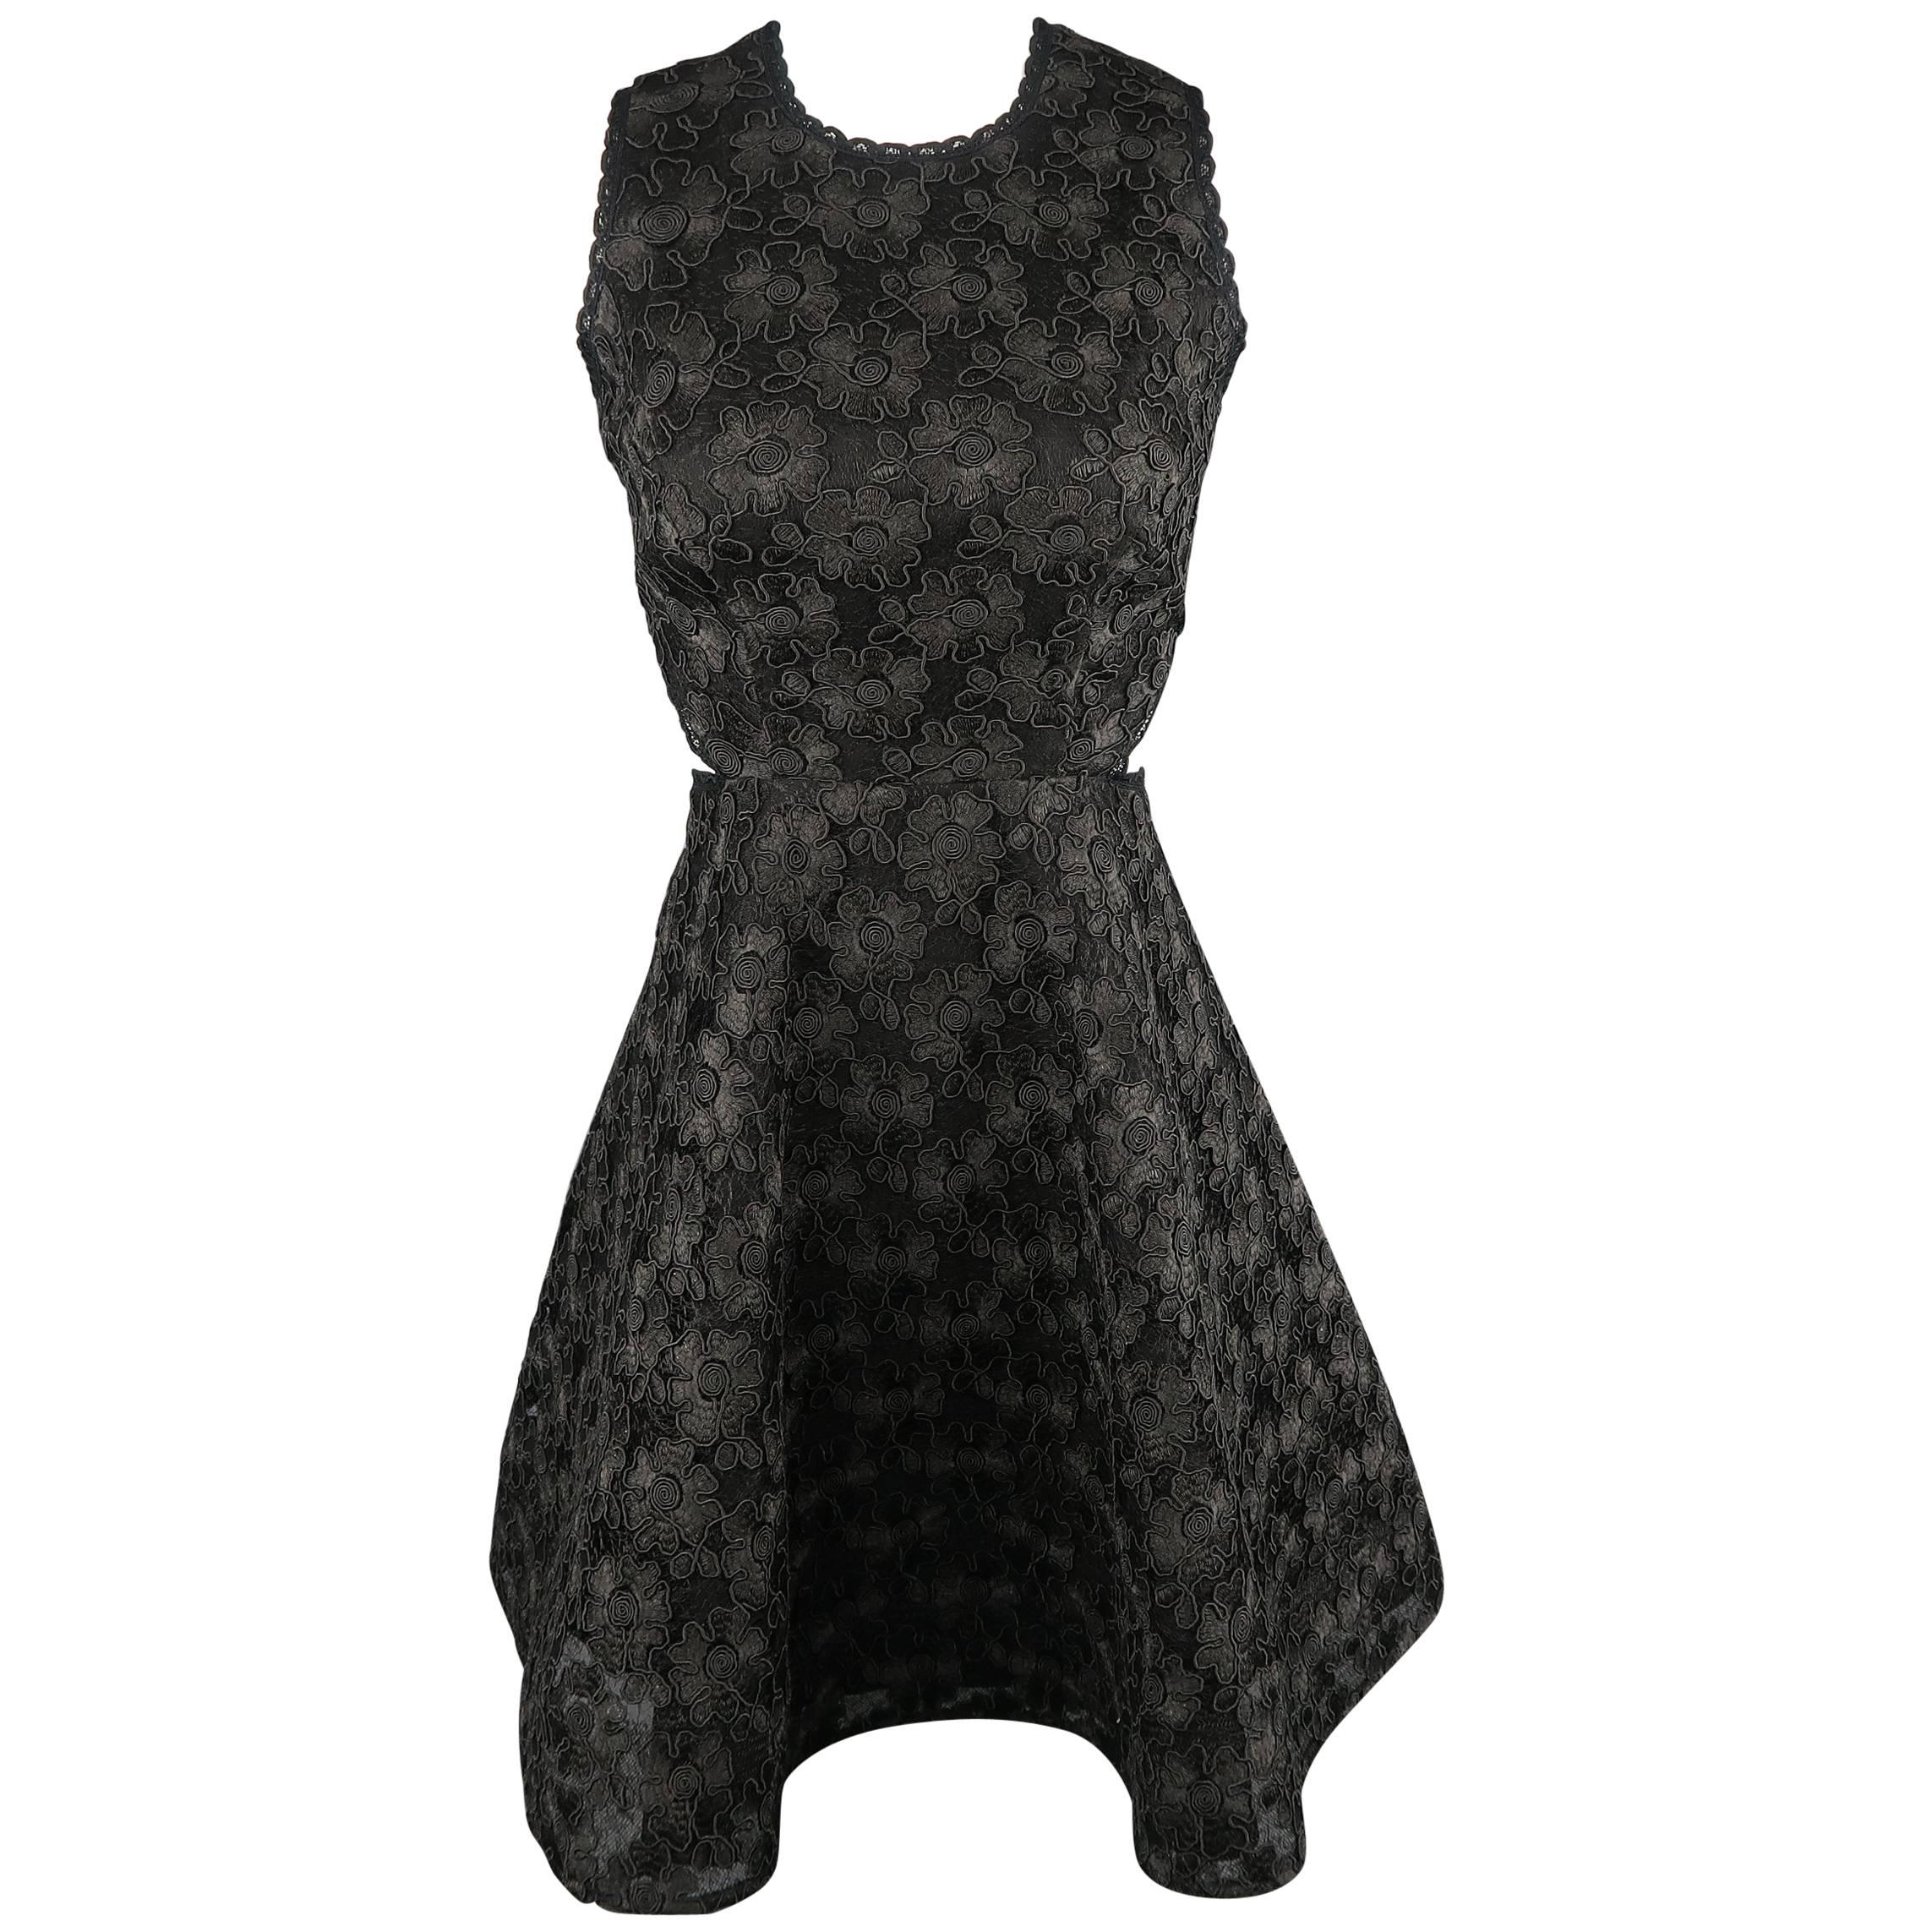 ALEXIS Size XS Black Lace Open Back Flair Skirt Cocktail Dress